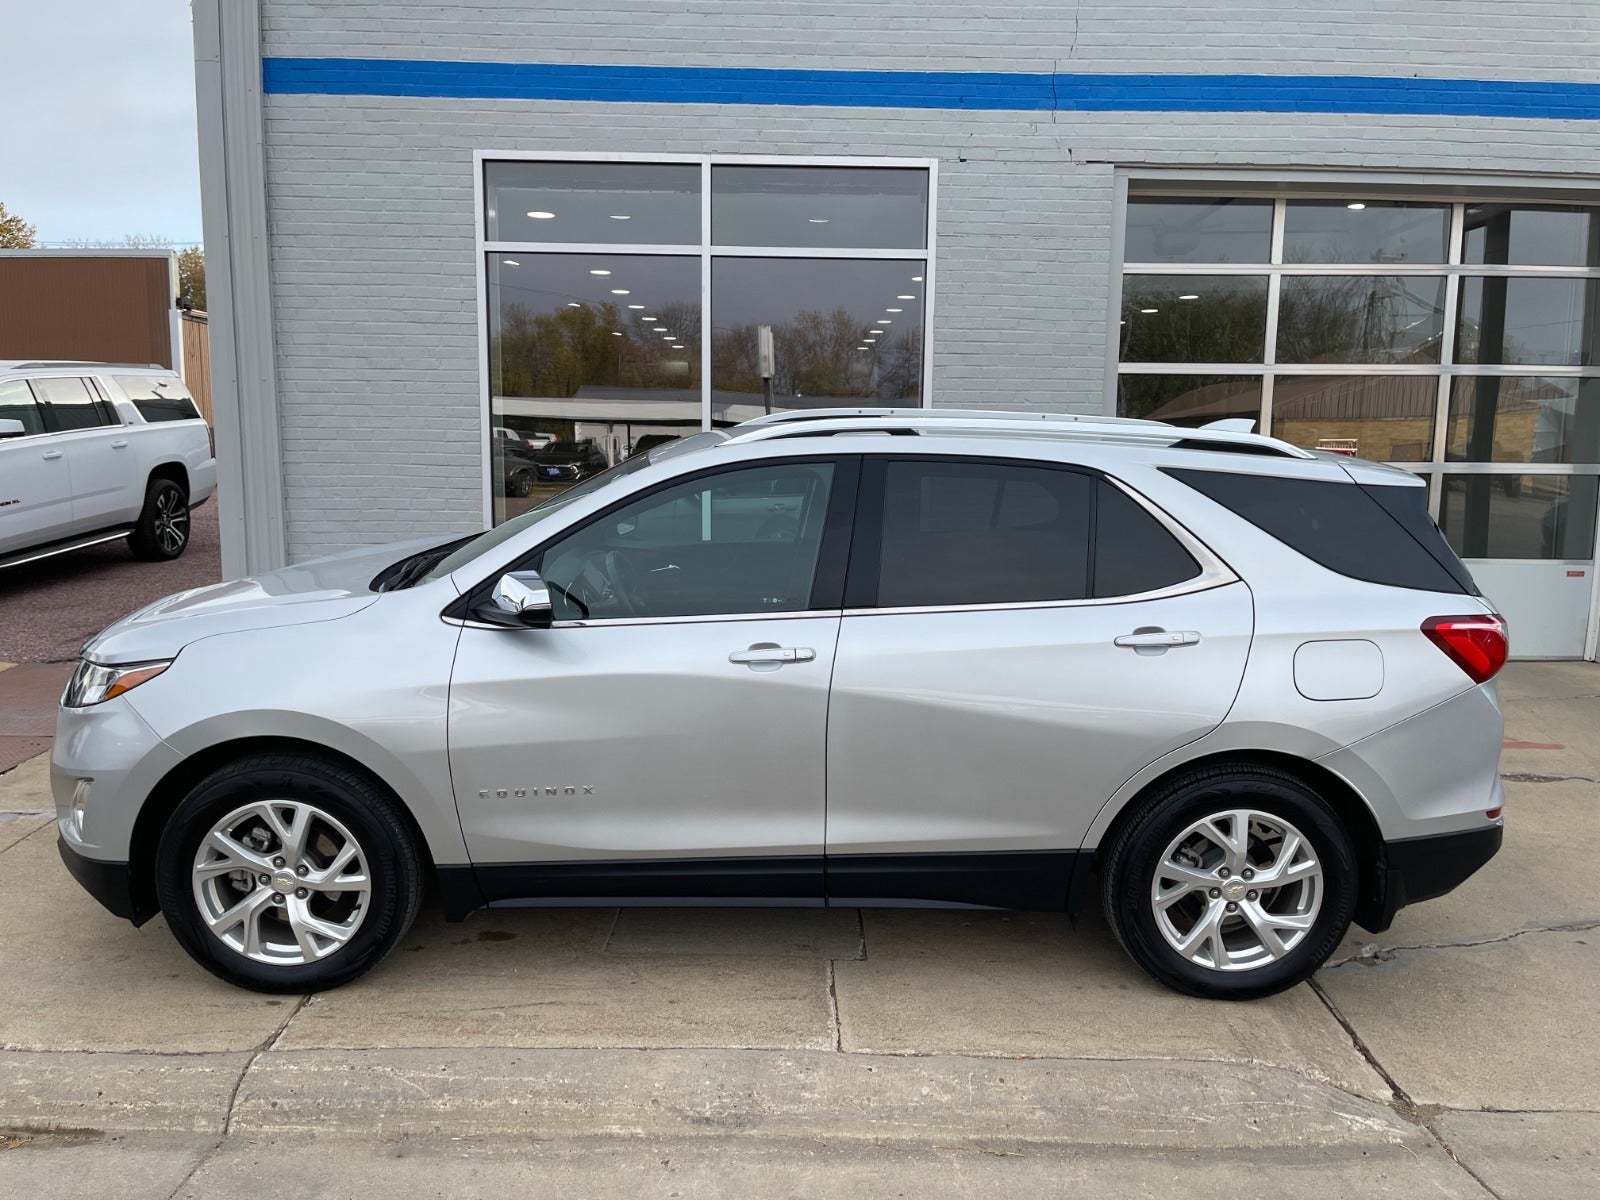 Used 2018 Chevrolet Equinox Premier with VIN 3GNAXPEU1JS537160 for sale in Edgerton, Minnesota